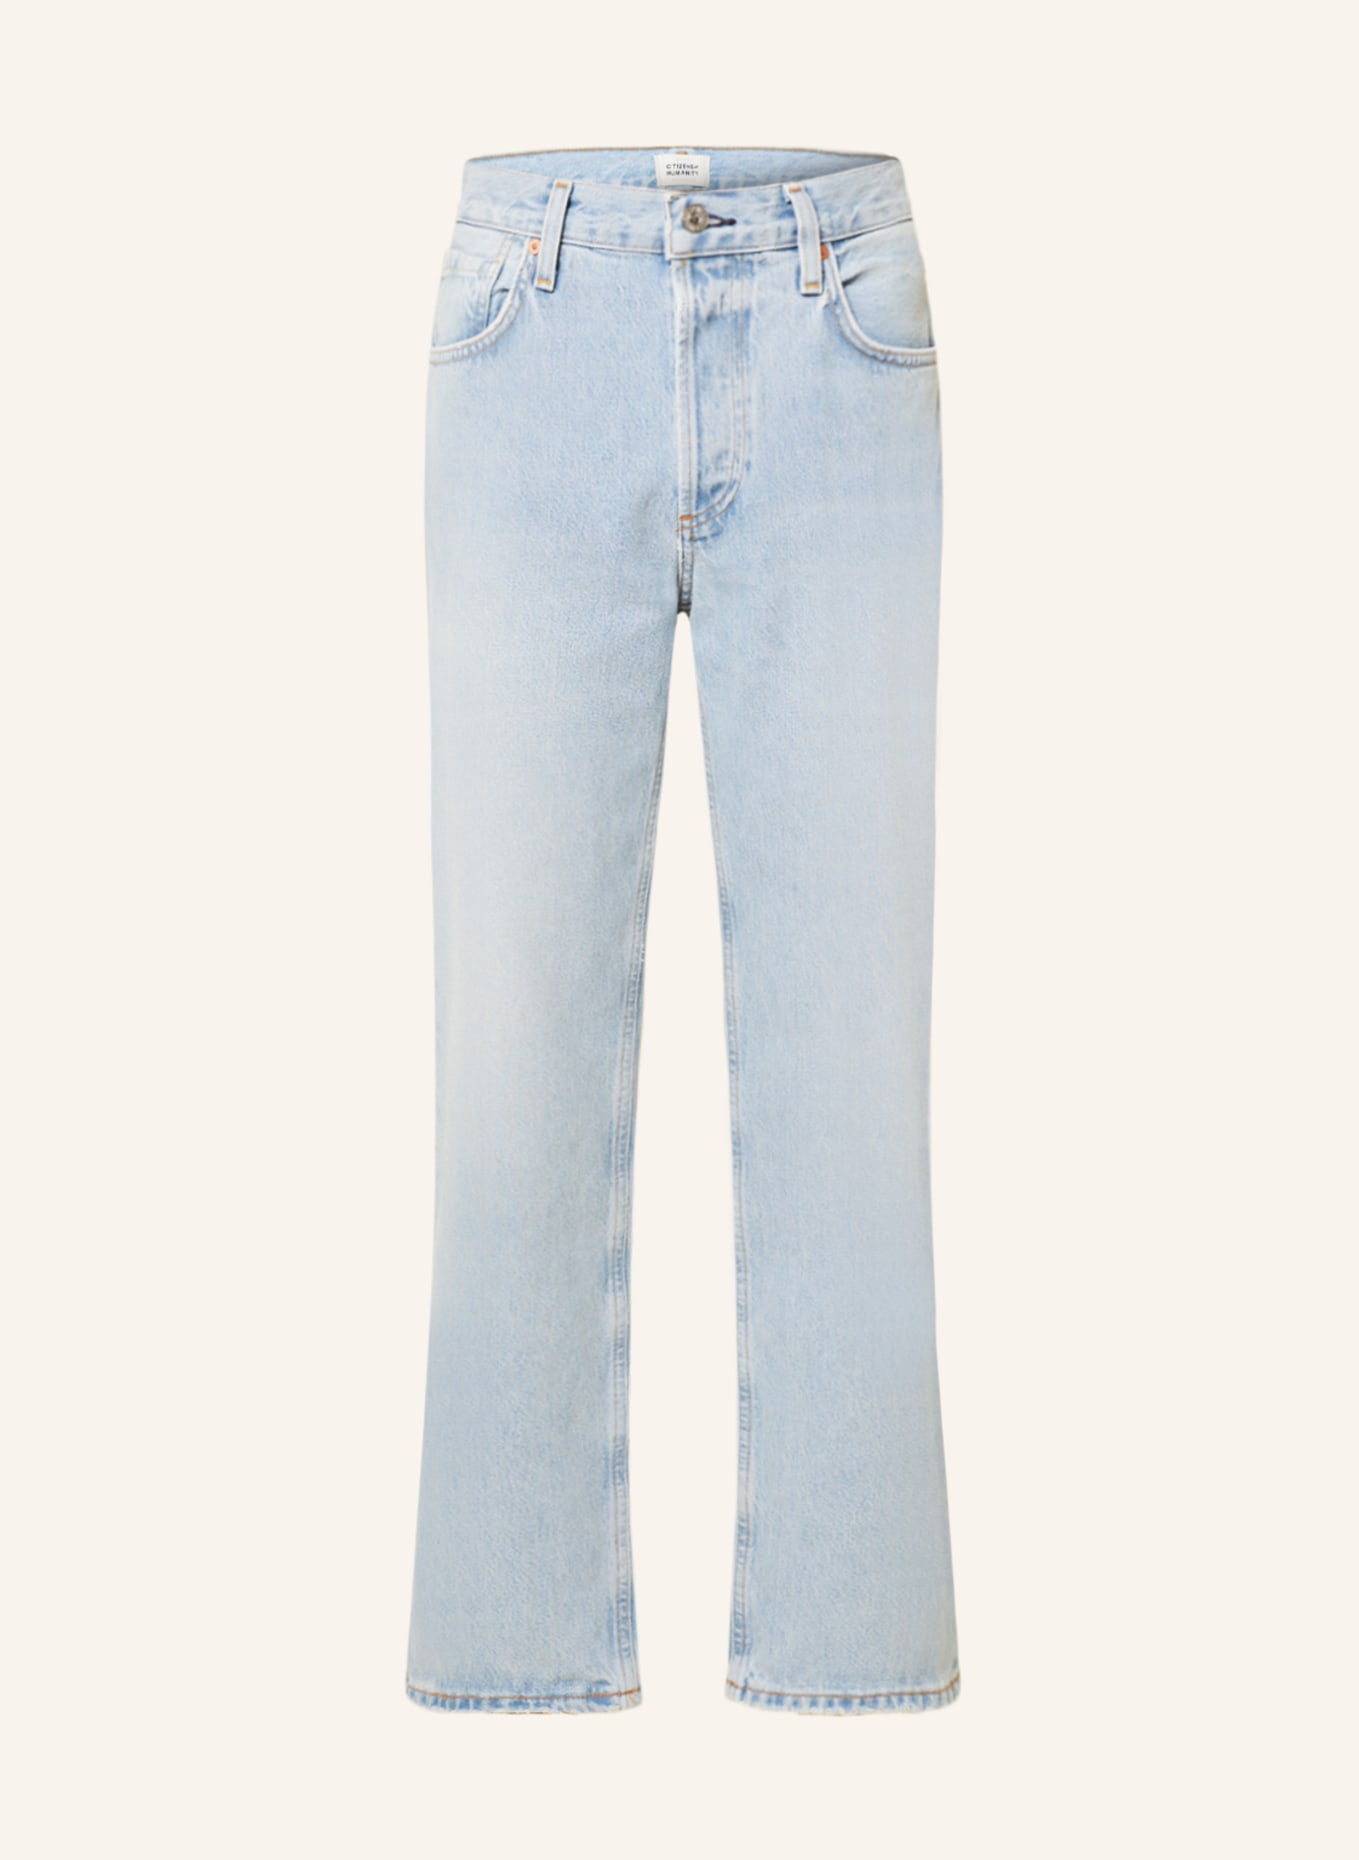 CITIZENS of HUMANITY Straight jeans, Color: scout lt vint ind w/damage (Image 1)